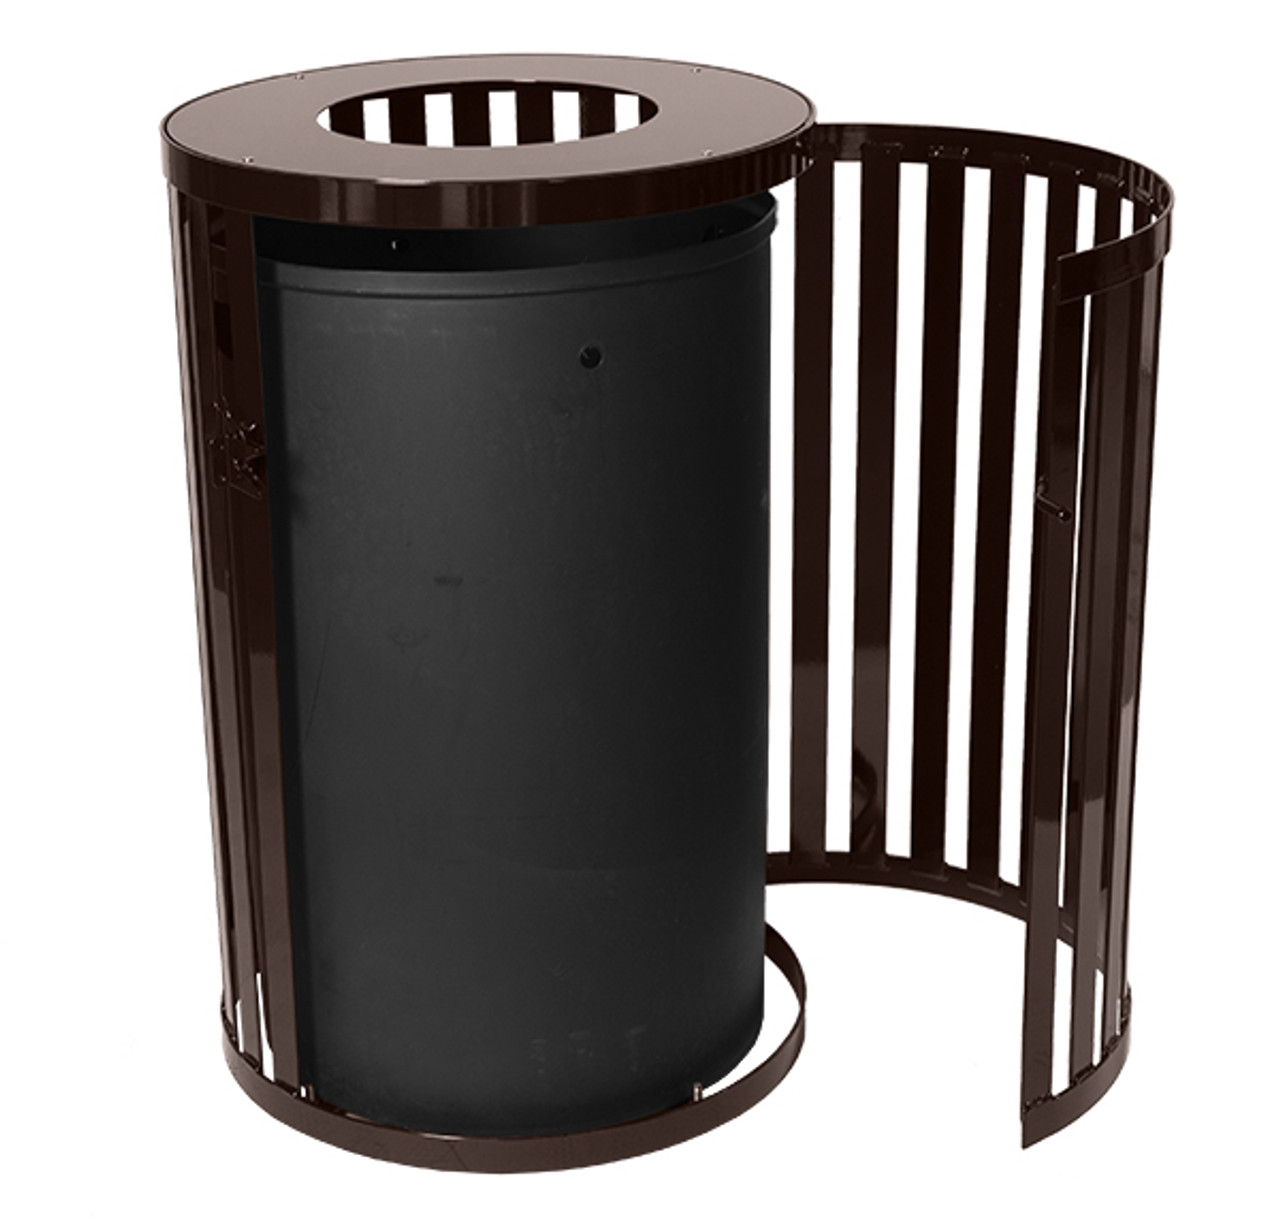 South Hampton 45 Gallon SCTP-40 Flat Top Trash Can with Side Gate Coffee